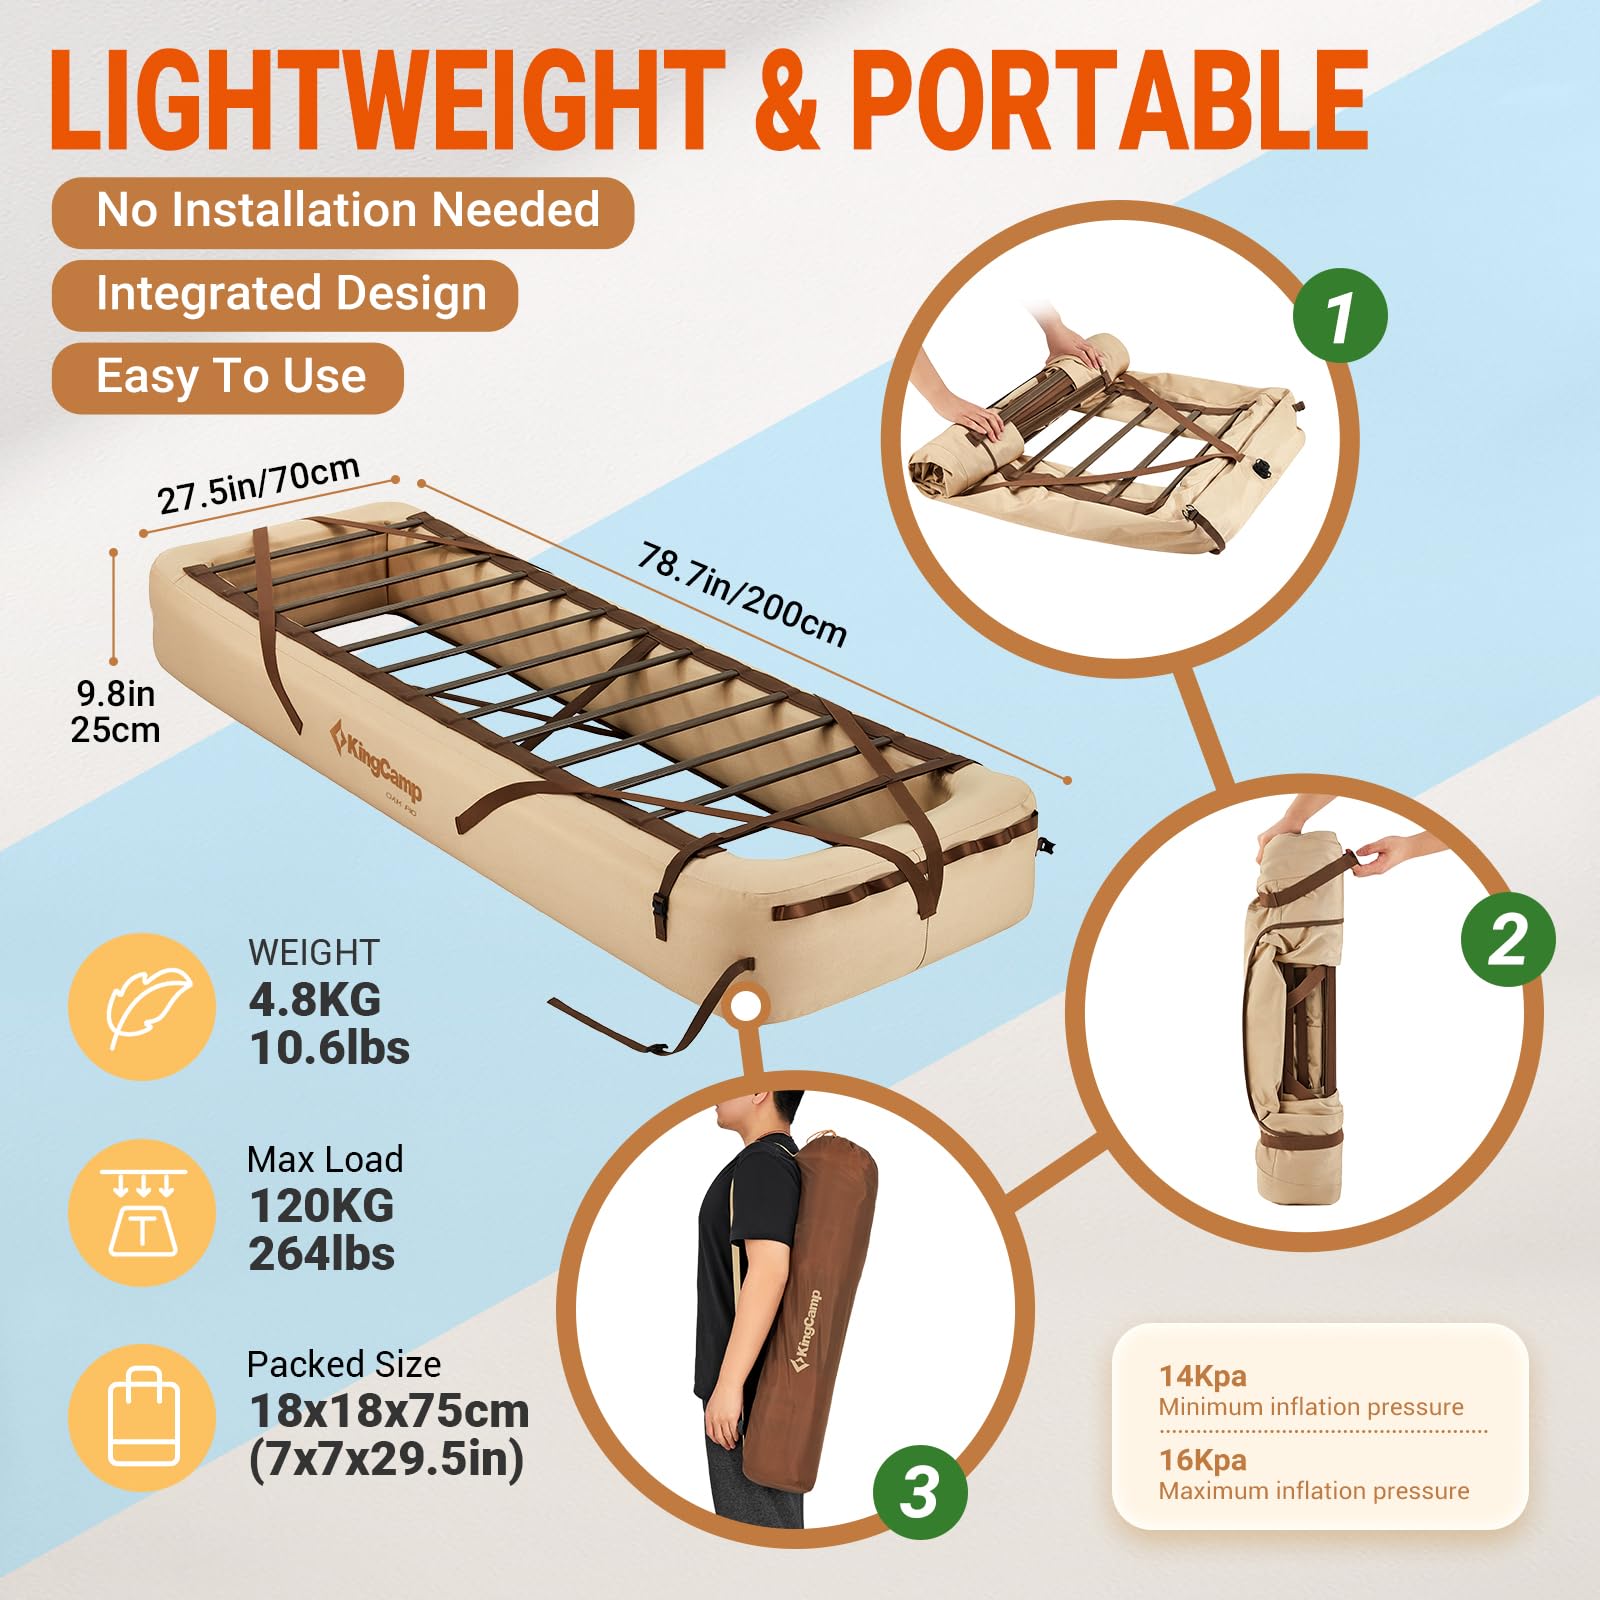 KingCamp OAK P10 Camping Air Bed Frame with Inflatable Backpacking Pad